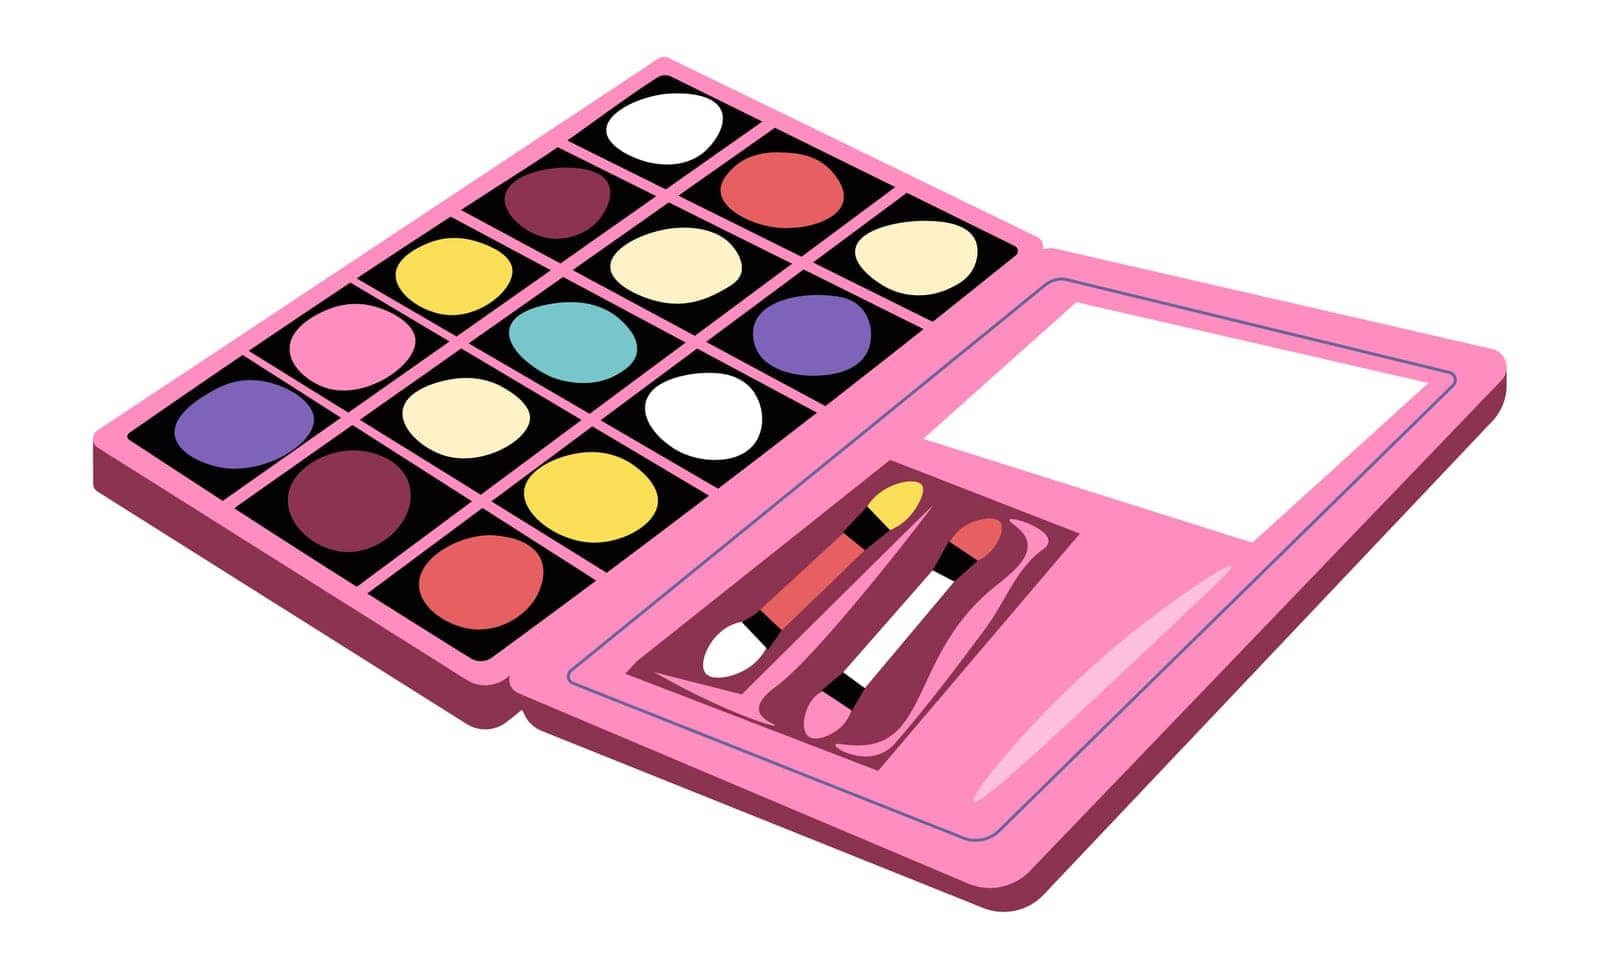 Palette of eye shades cosmetics and makeup product by Sonulkaster